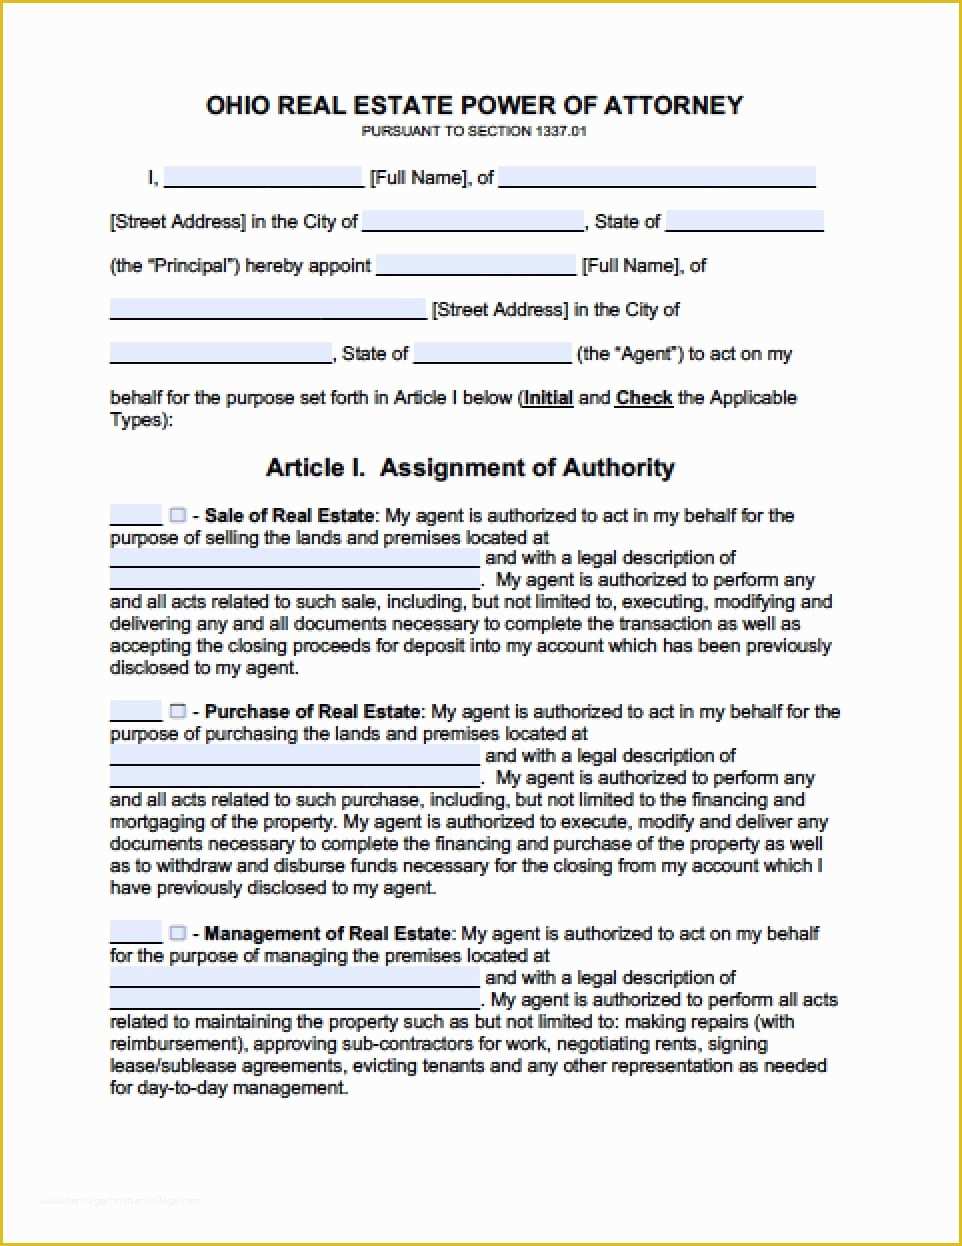 Free Poa Template Of Ohio Real Estate Only Power Of attorney form Power Of